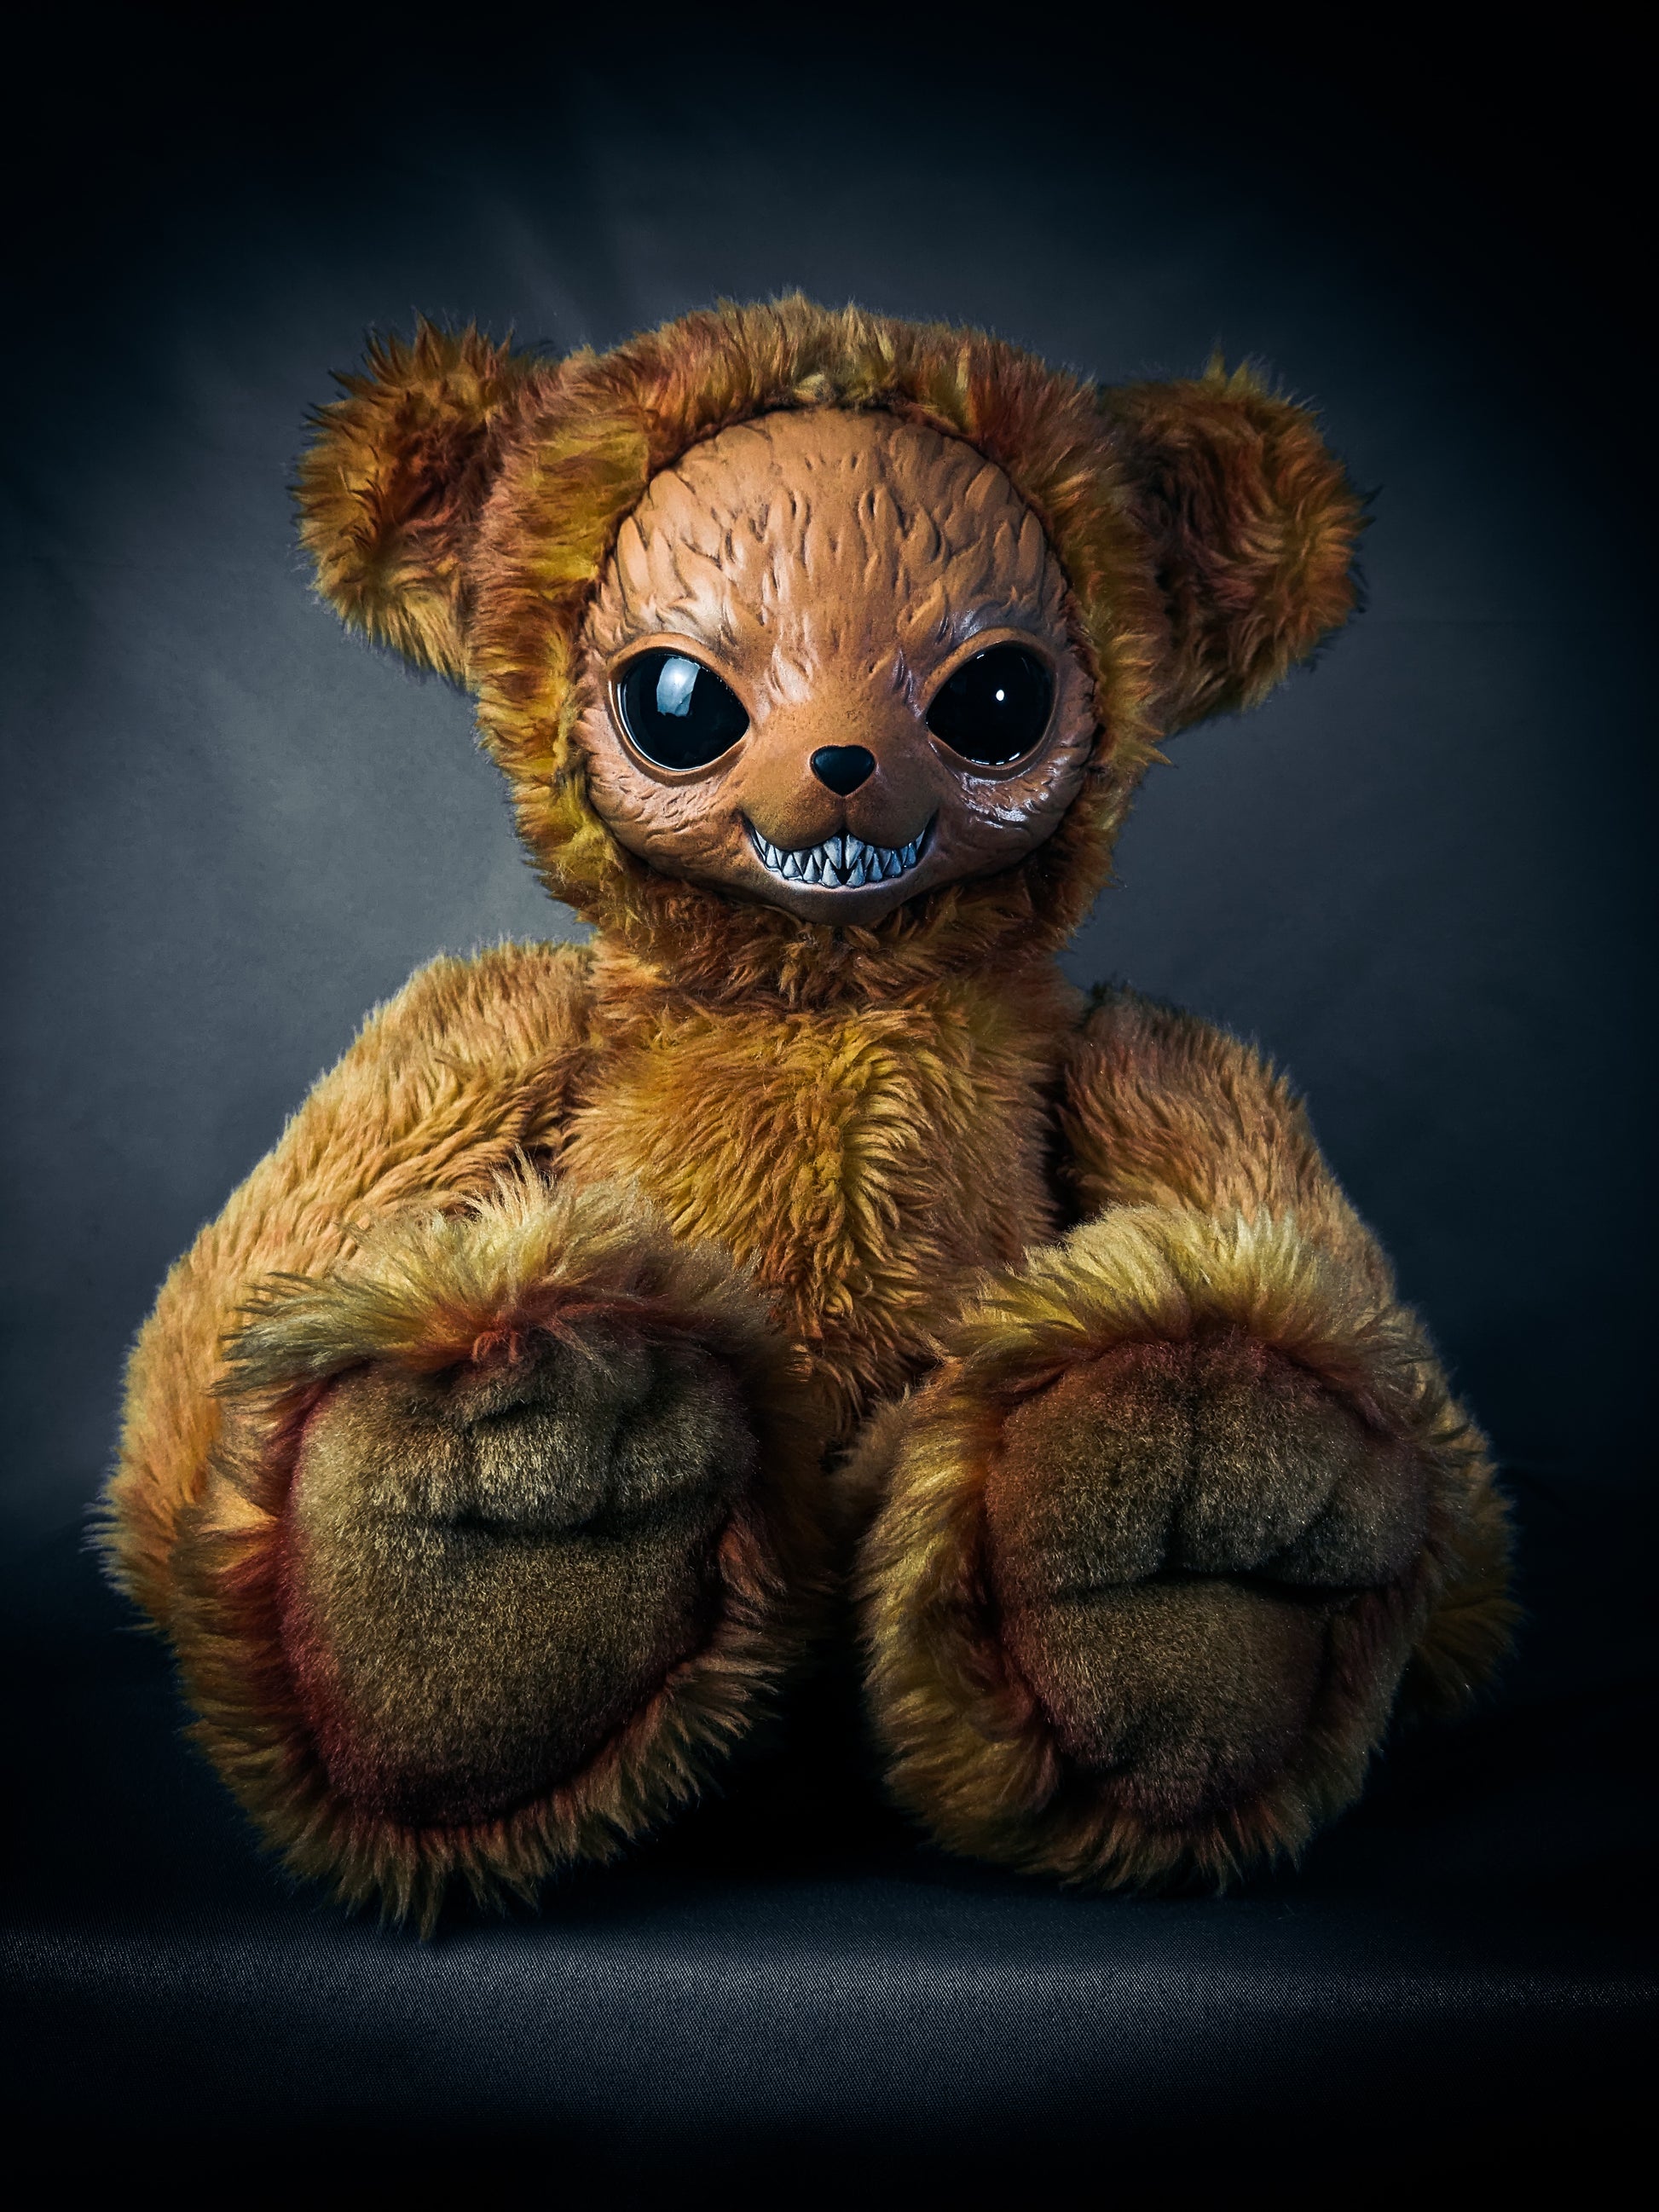 Teething n' Tearing: HOWL - CRYPTCRITS Handcrafted Creepy Cute Monster Art Doll Plush Toy for Cryptozoologists